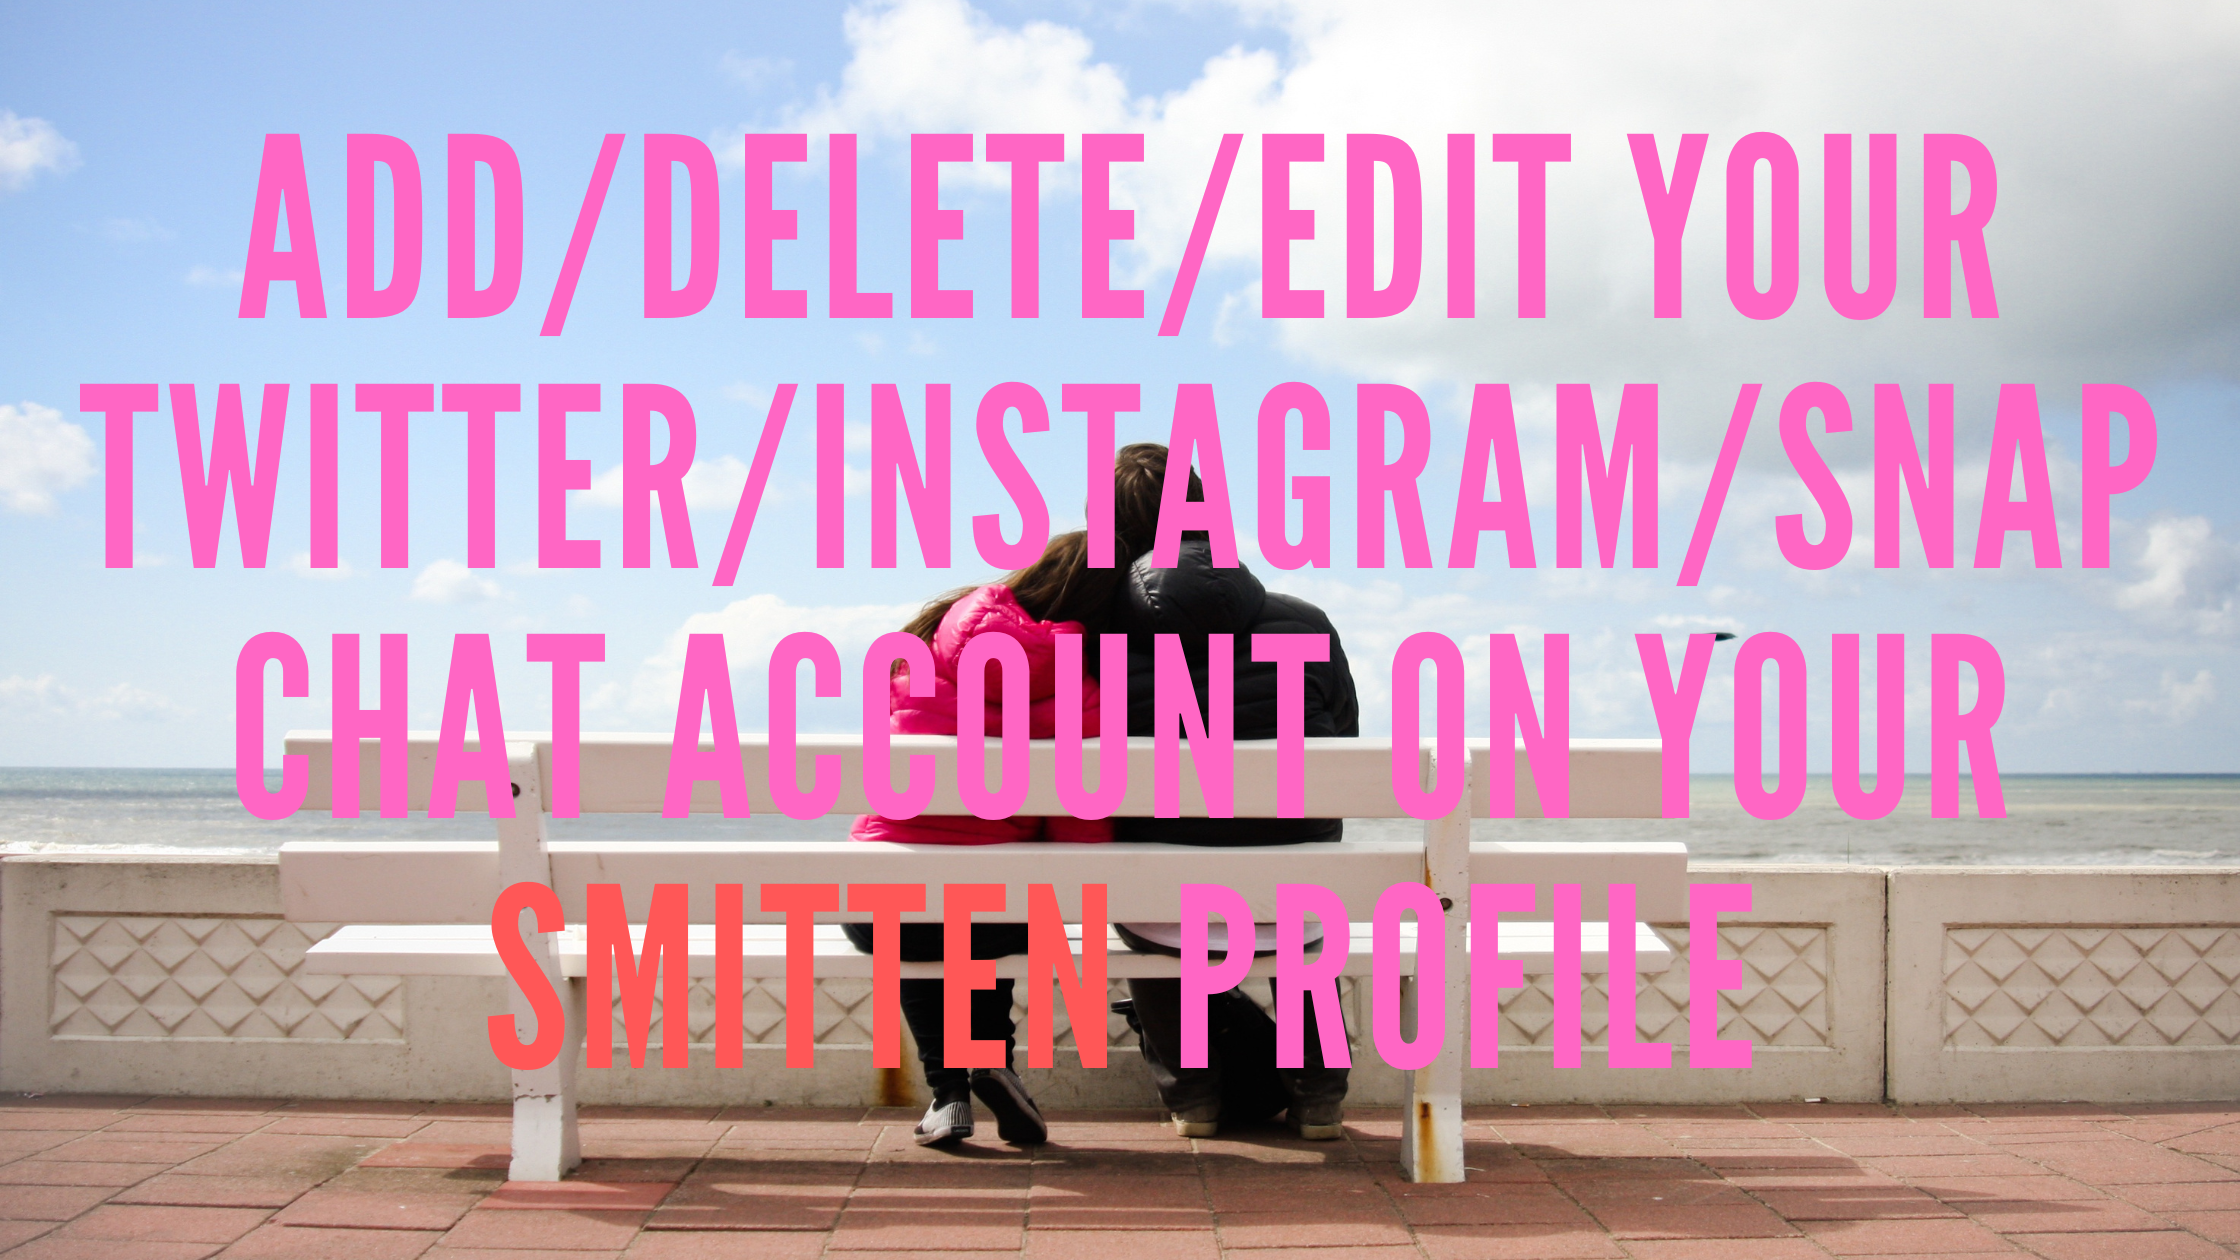 How Do You Add/Delete/Edit Your Twitter/Instagram/Snapchat Account On Your Smitten Profile